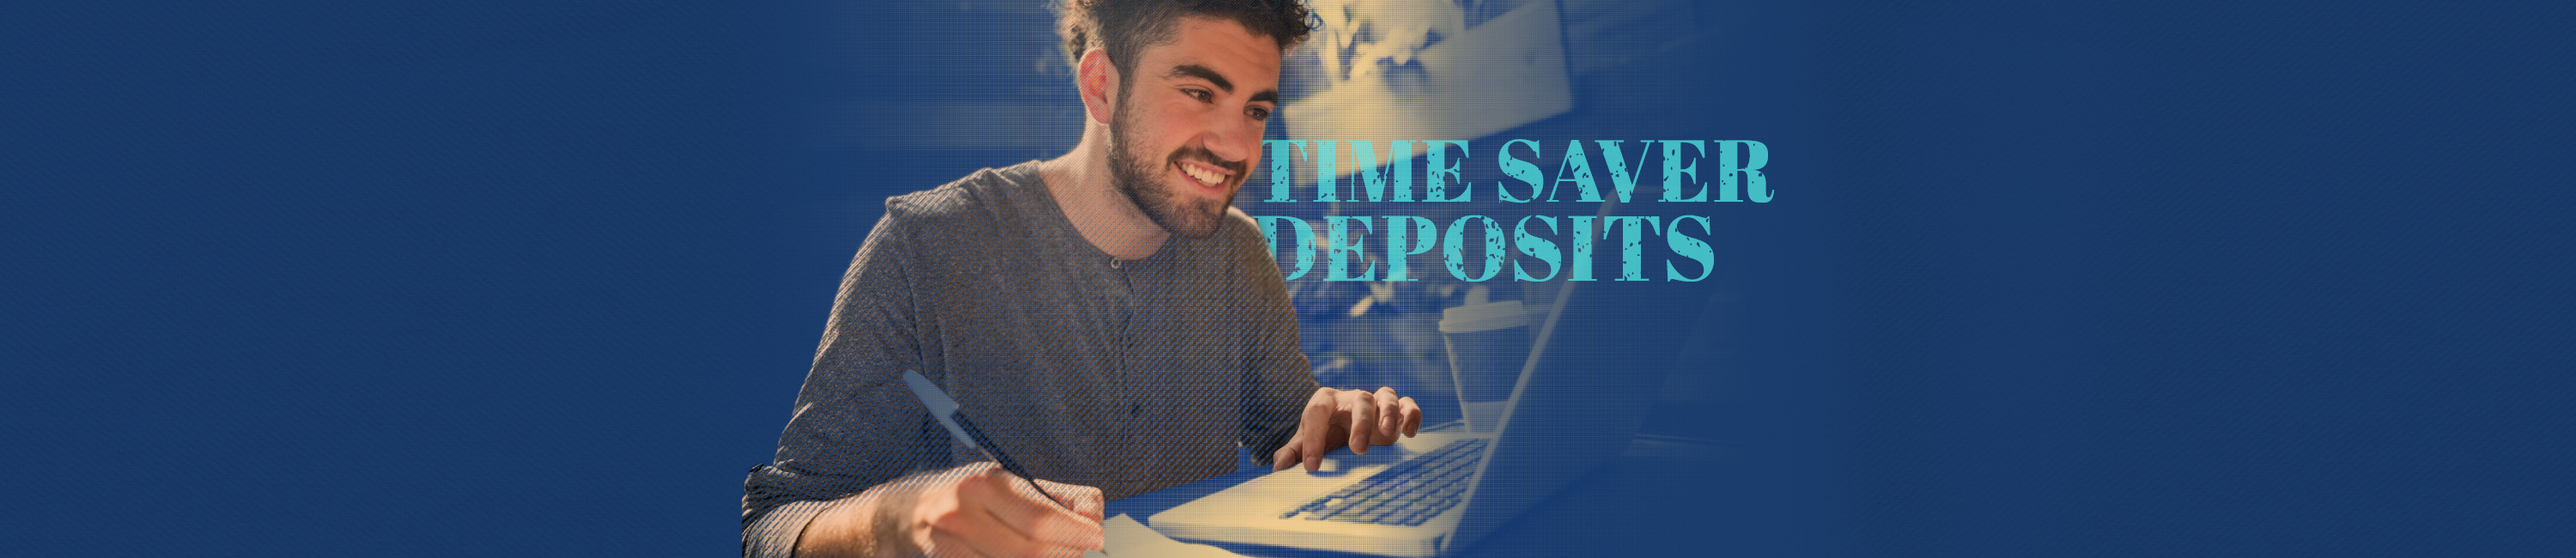 Man smiling happily at his computer because he saved so much time with his Time Saver Deposits tool from Fidelity Bank & Trust. Words on image say Time Saver Deposits